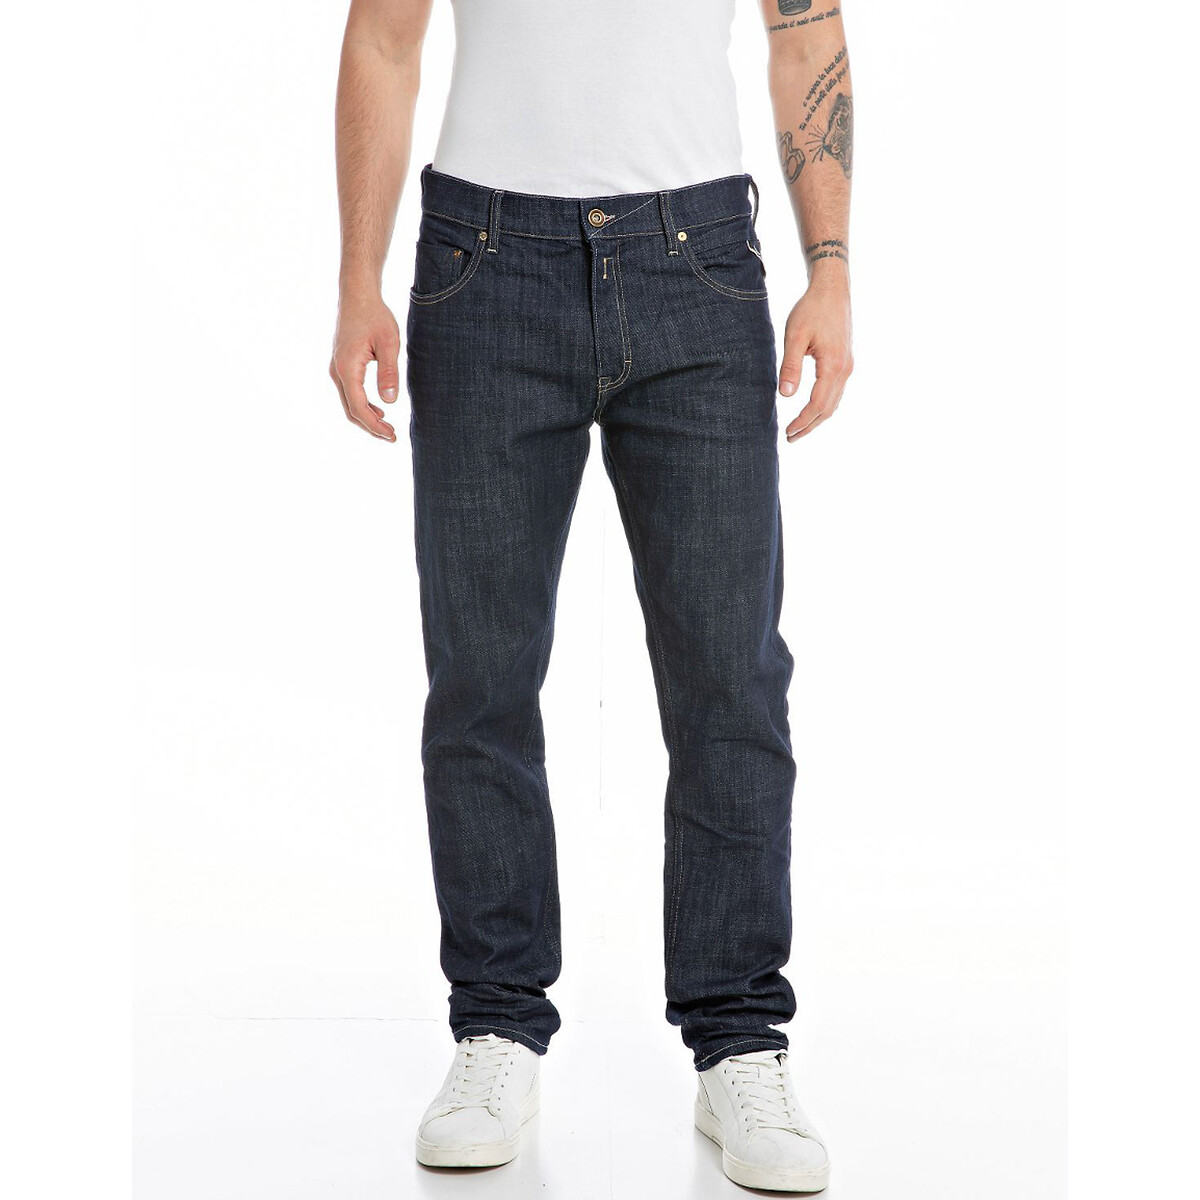 mickym tapered jeans in slim fit and mid rise